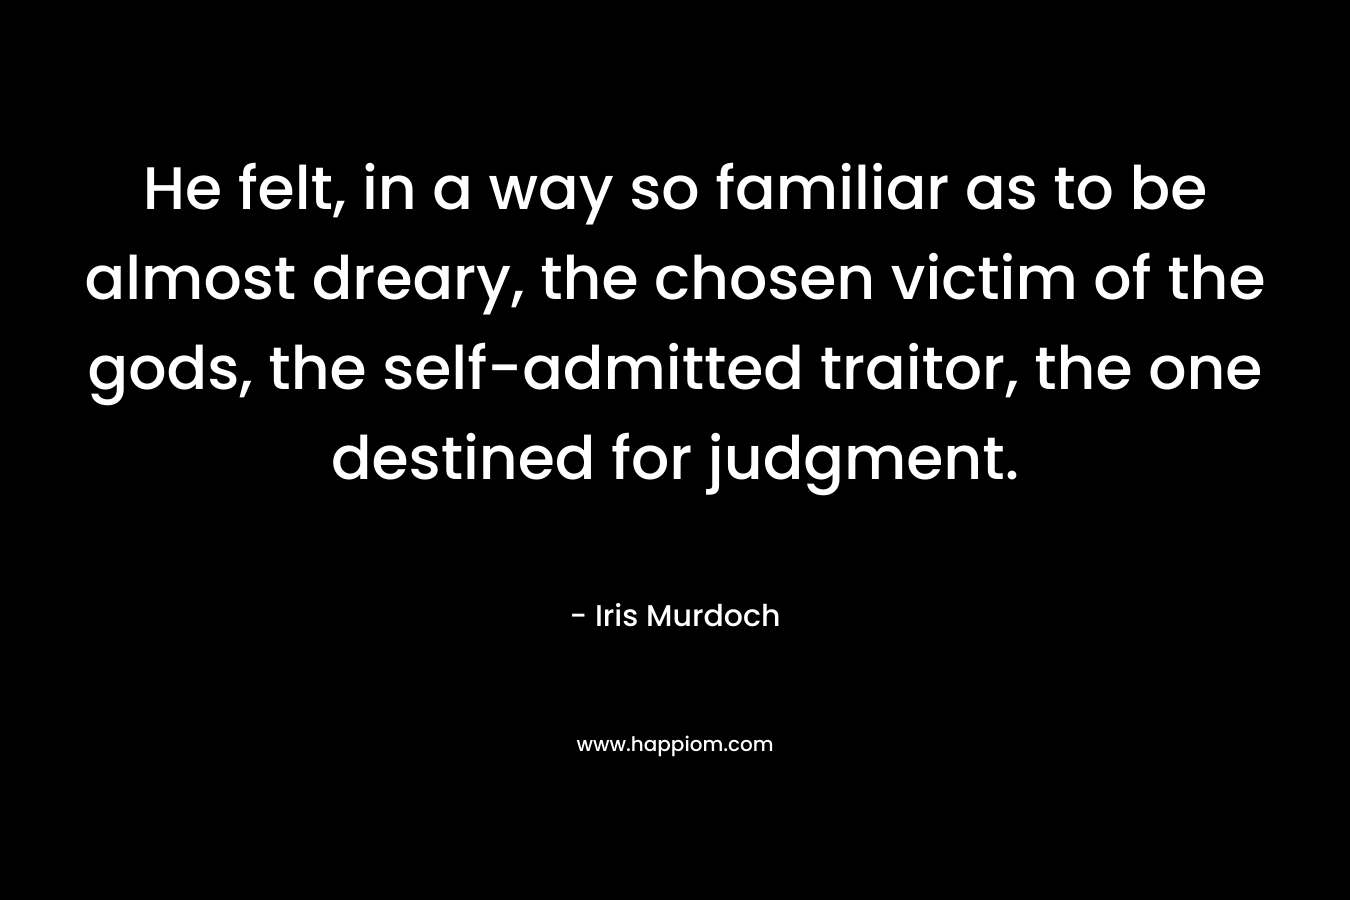 He felt, in a way so familiar as to be almost dreary, the chosen victim of the gods, the self-admitted traitor, the one destined for judgment. – Iris Murdoch